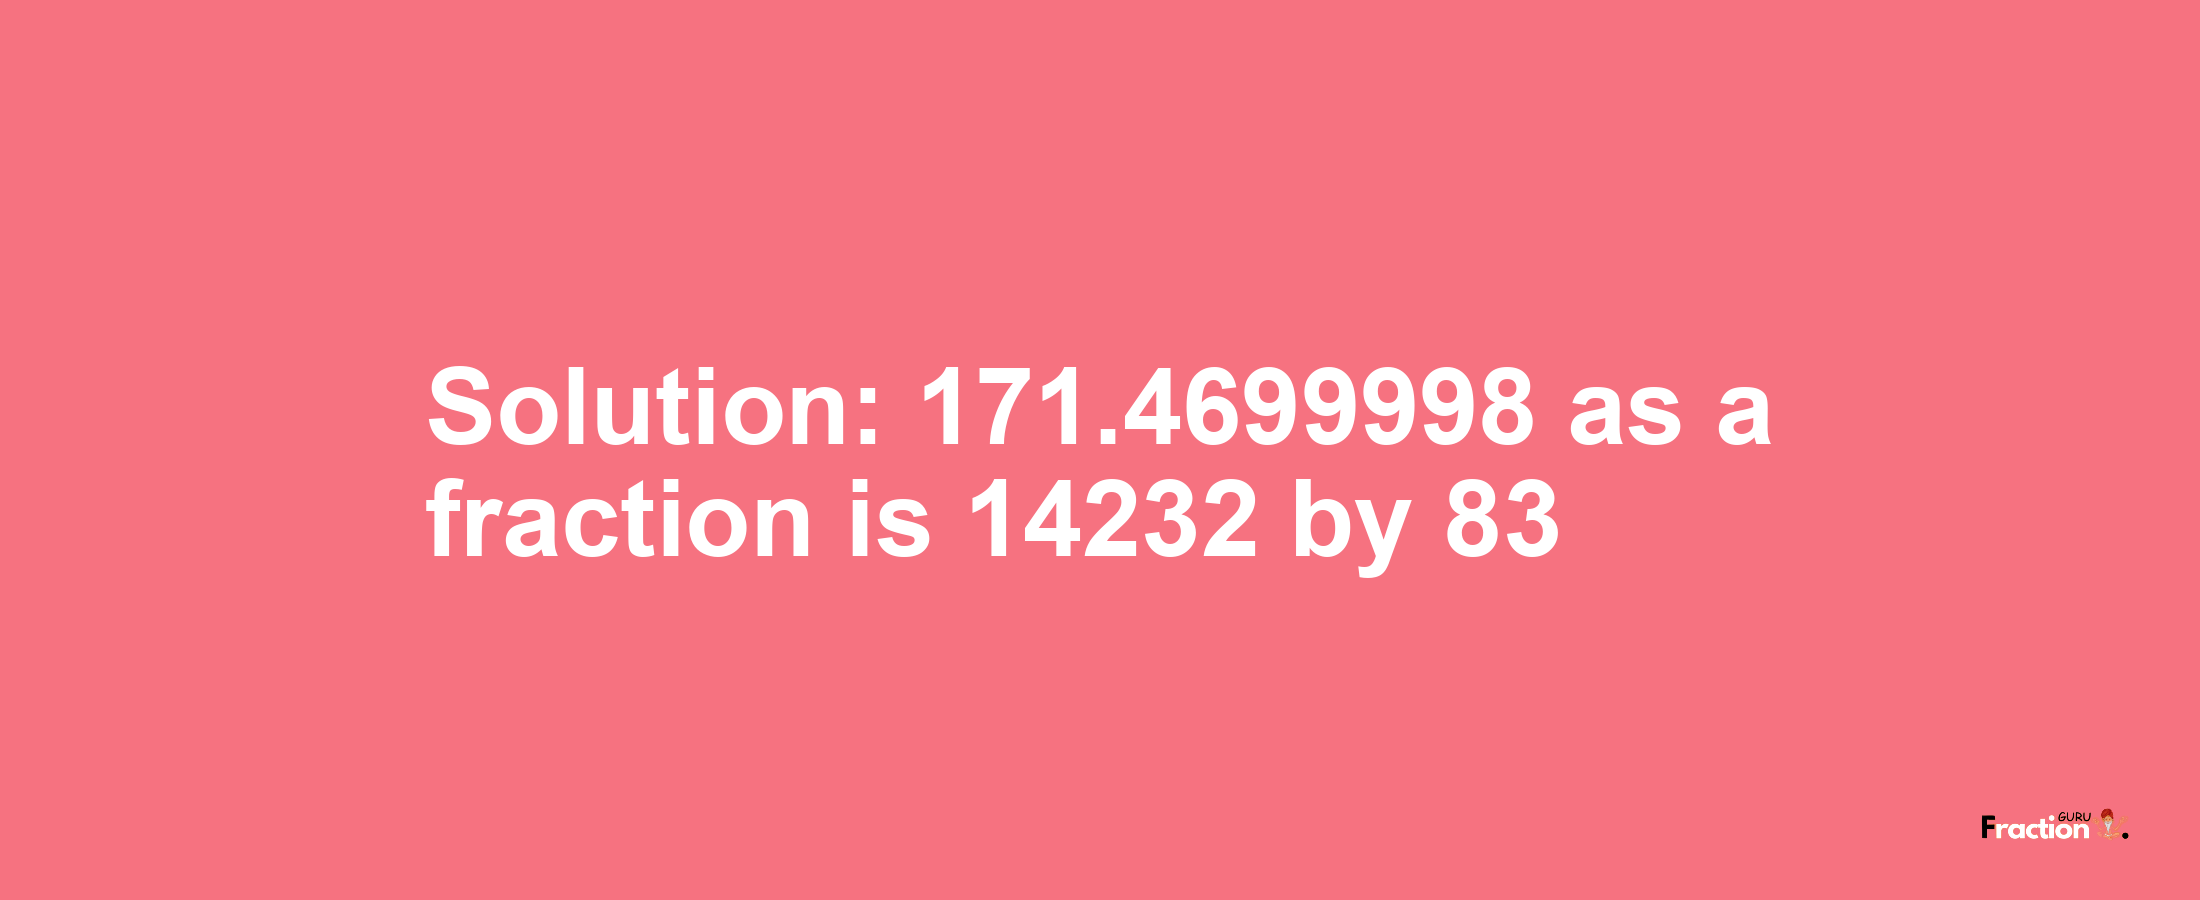 Solution:171.4699998 as a fraction is 14232/83